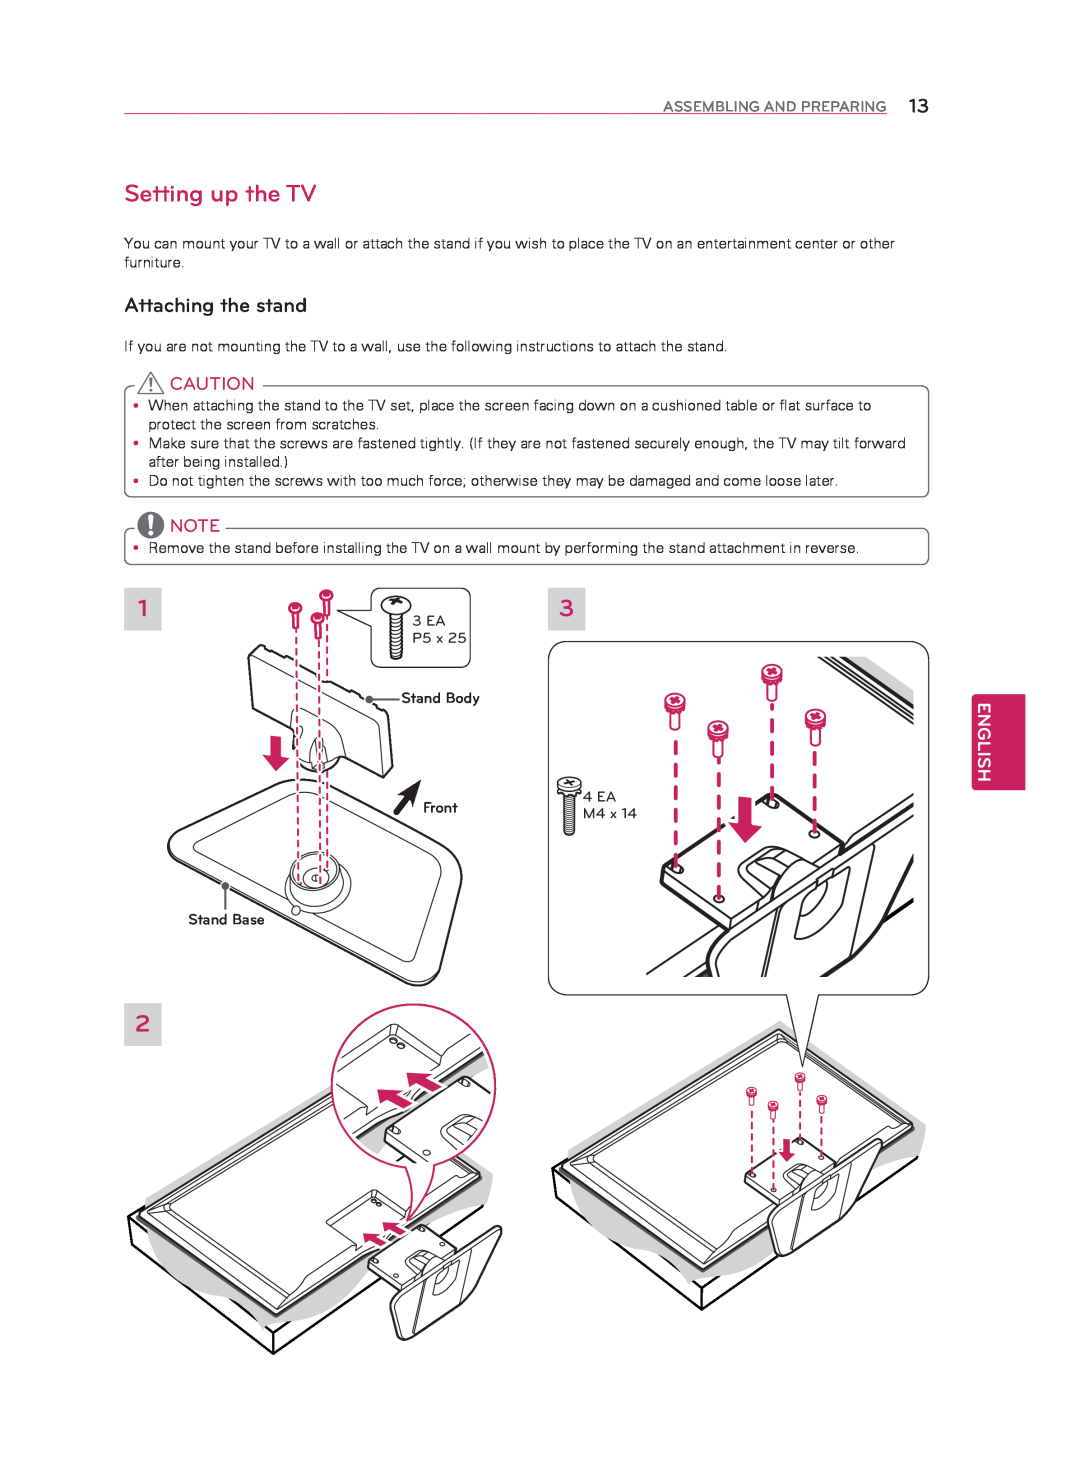 LG Electronics 60LN5400 owner manual Setting up the TV, Attaching the stand, English, Assembling And Preparing 